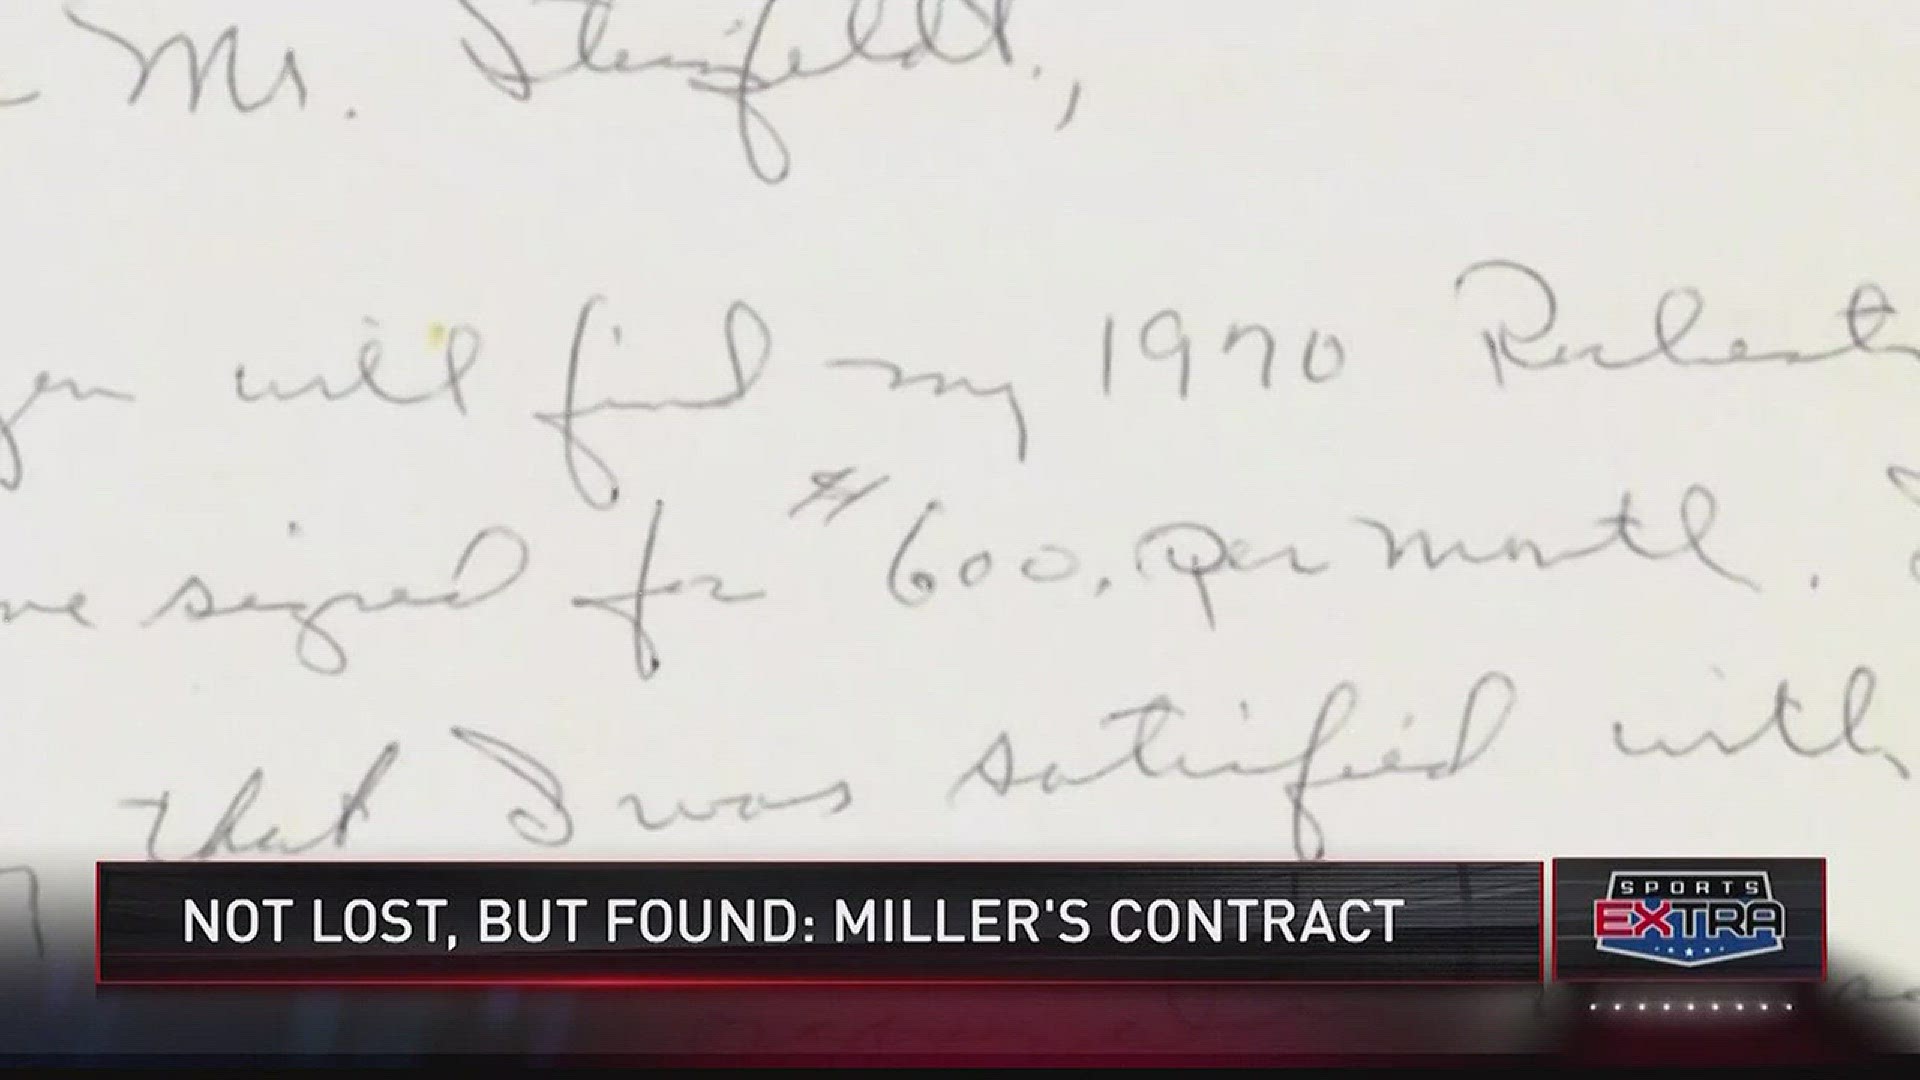 Houston Astros' AAA pitching coach coach Dyar Miller now has something he'd forgotten about: his 1970 player contract for the Rochester Red Wings.